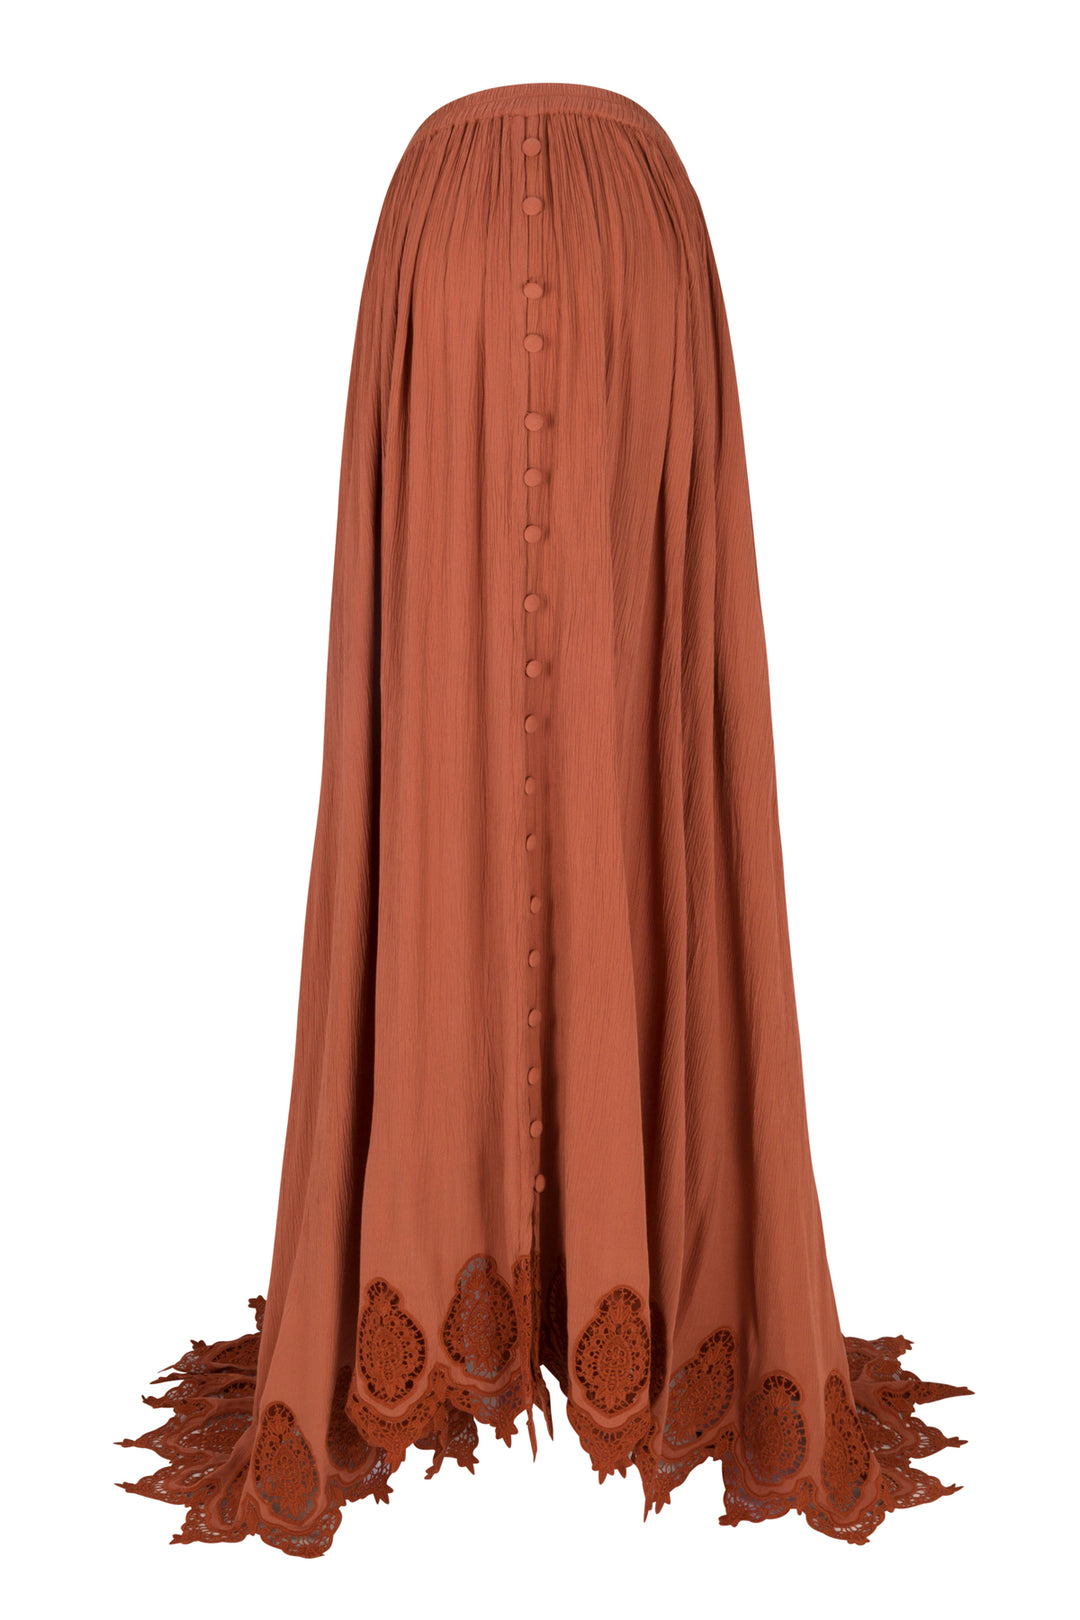 Spice Magnolia Long Skirt One-size